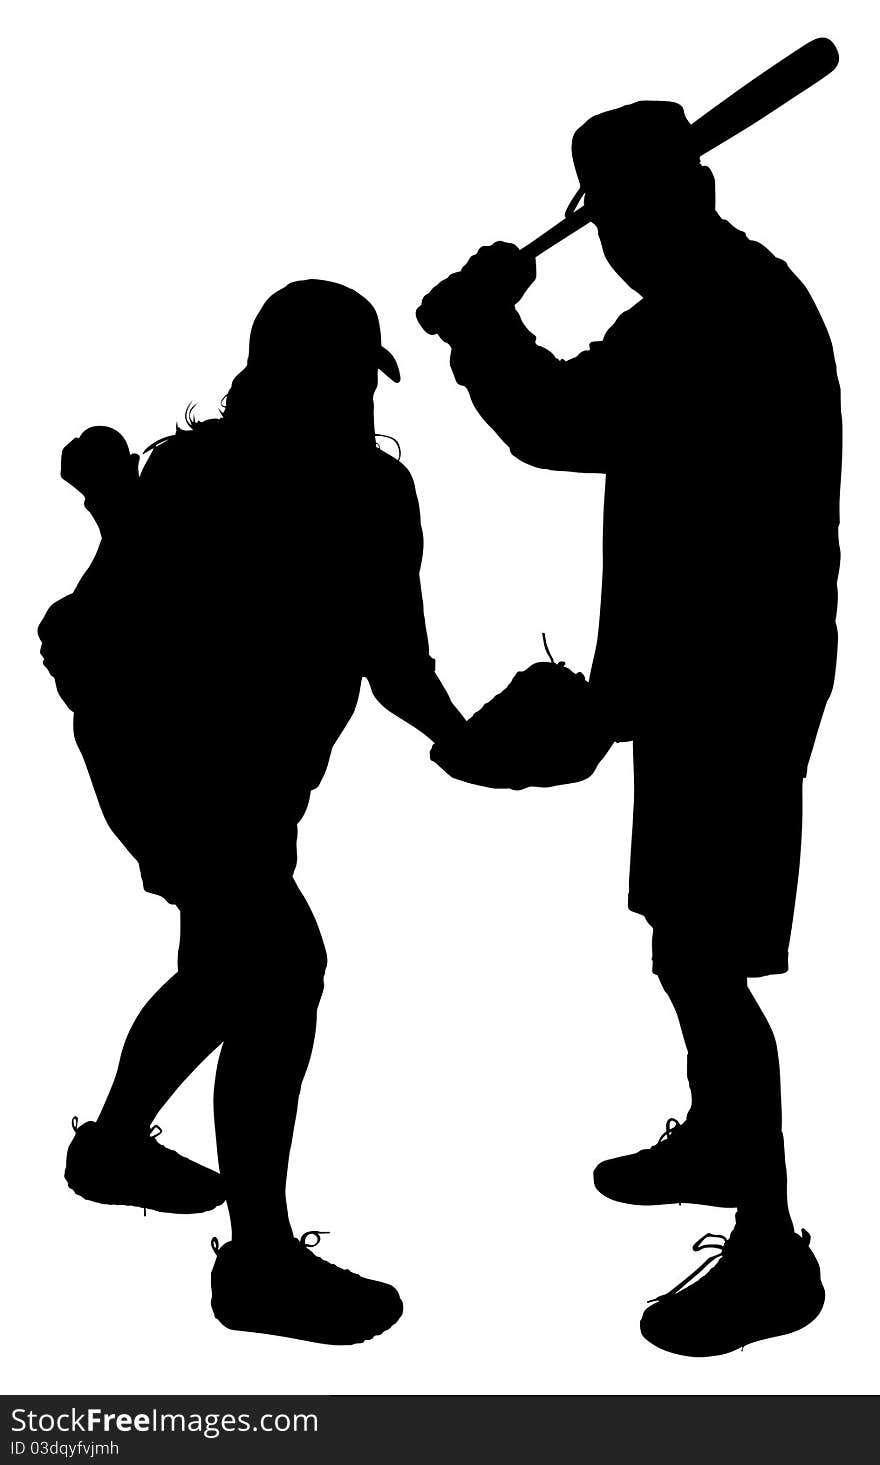 Silhouettes of Adult man, woman, Couple Playing Baseball with Clipping Path. Silhouettes of Adult man, woman, Couple Playing Baseball with Clipping Path